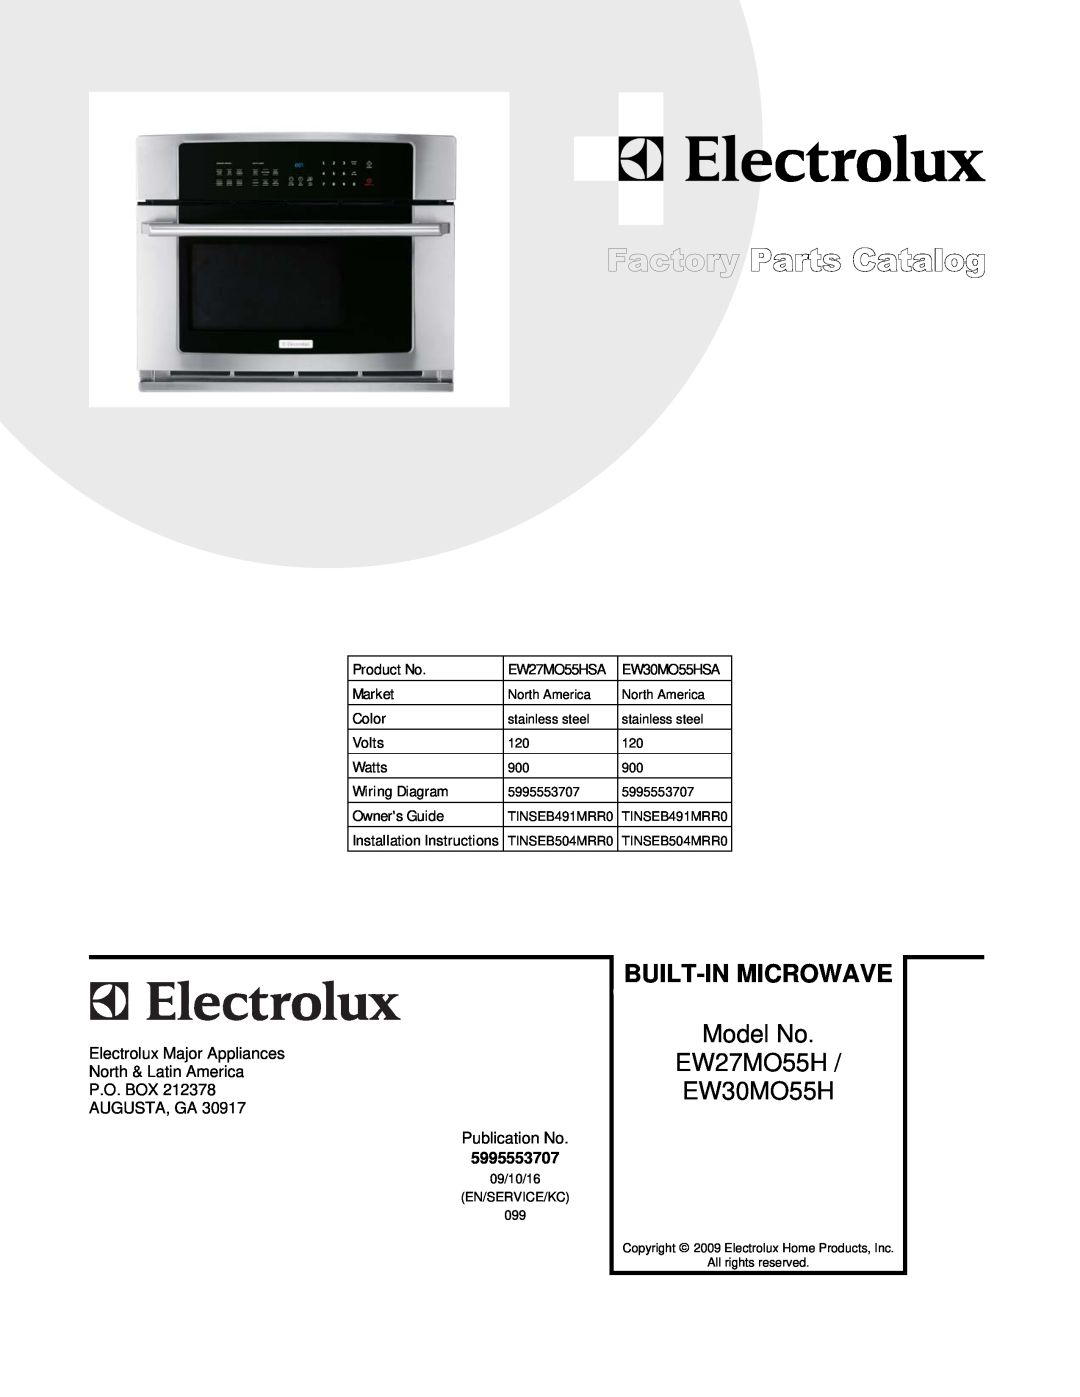 Electrolux EW30MO55HSA installation instructions Built-In Microwave, Model No, EW27MO55HSA Wiring.eps, P.O. Box 